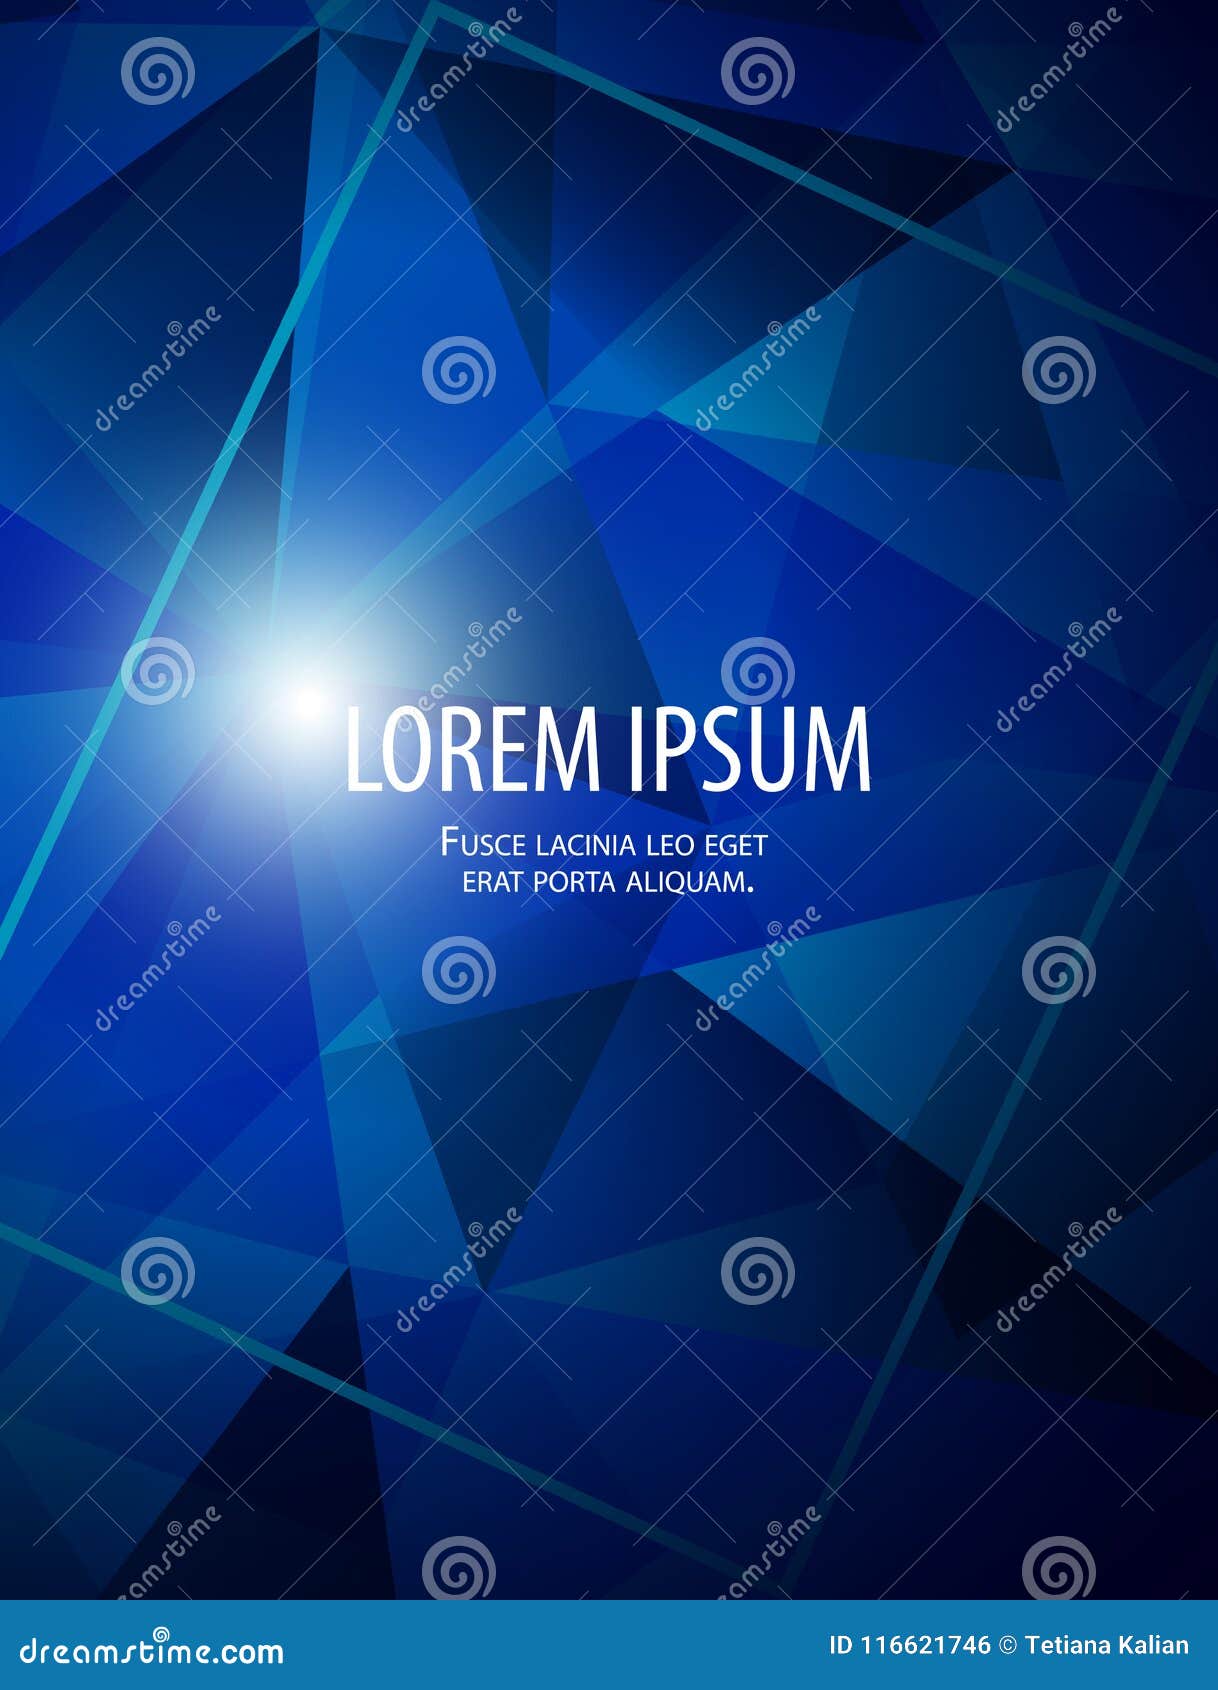 Modern Abstract Bussiness Background with Frame, Gradients and Light in ...